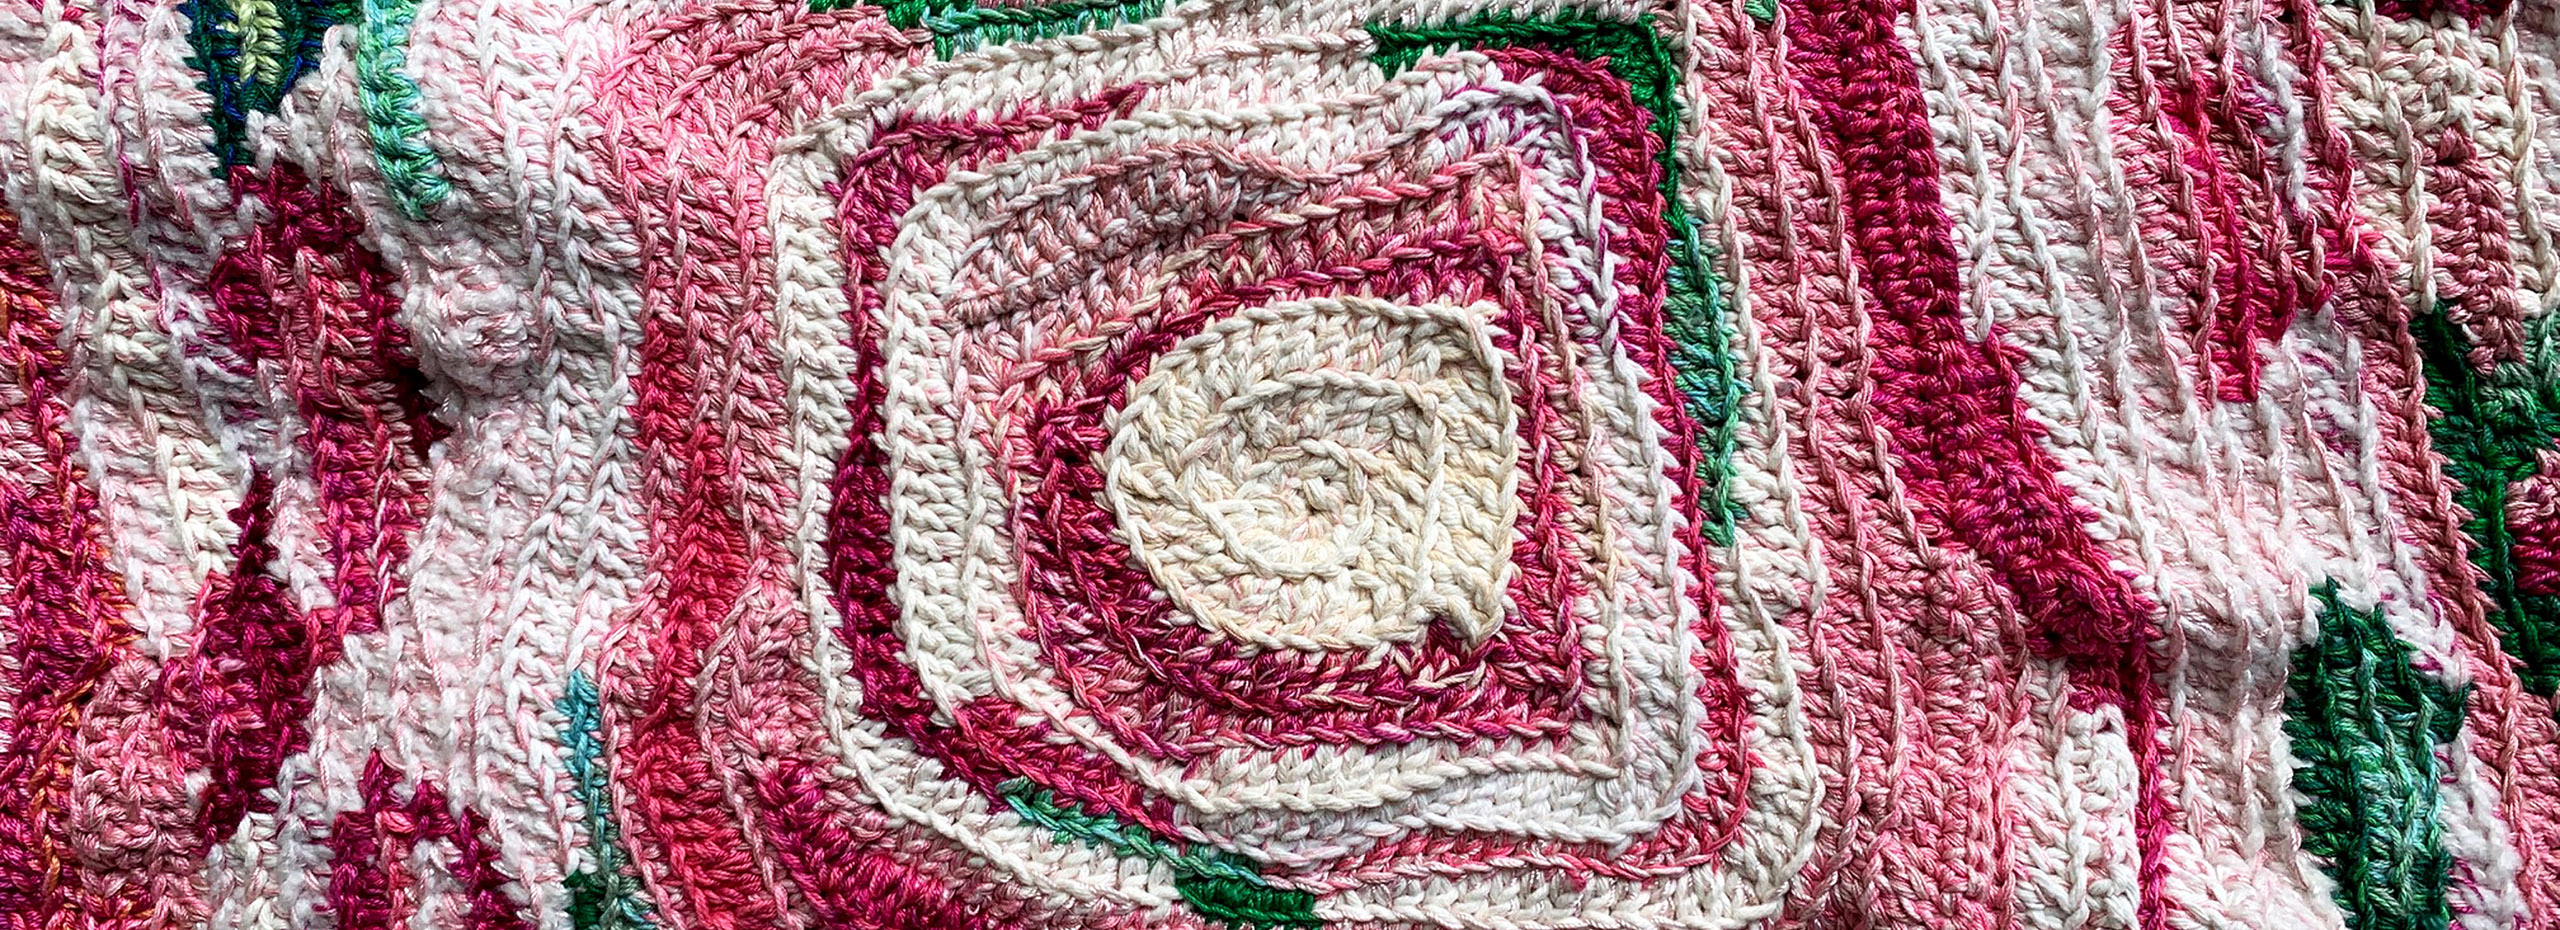 A closeup of a roselike form crocheted in whites, pinks, and green